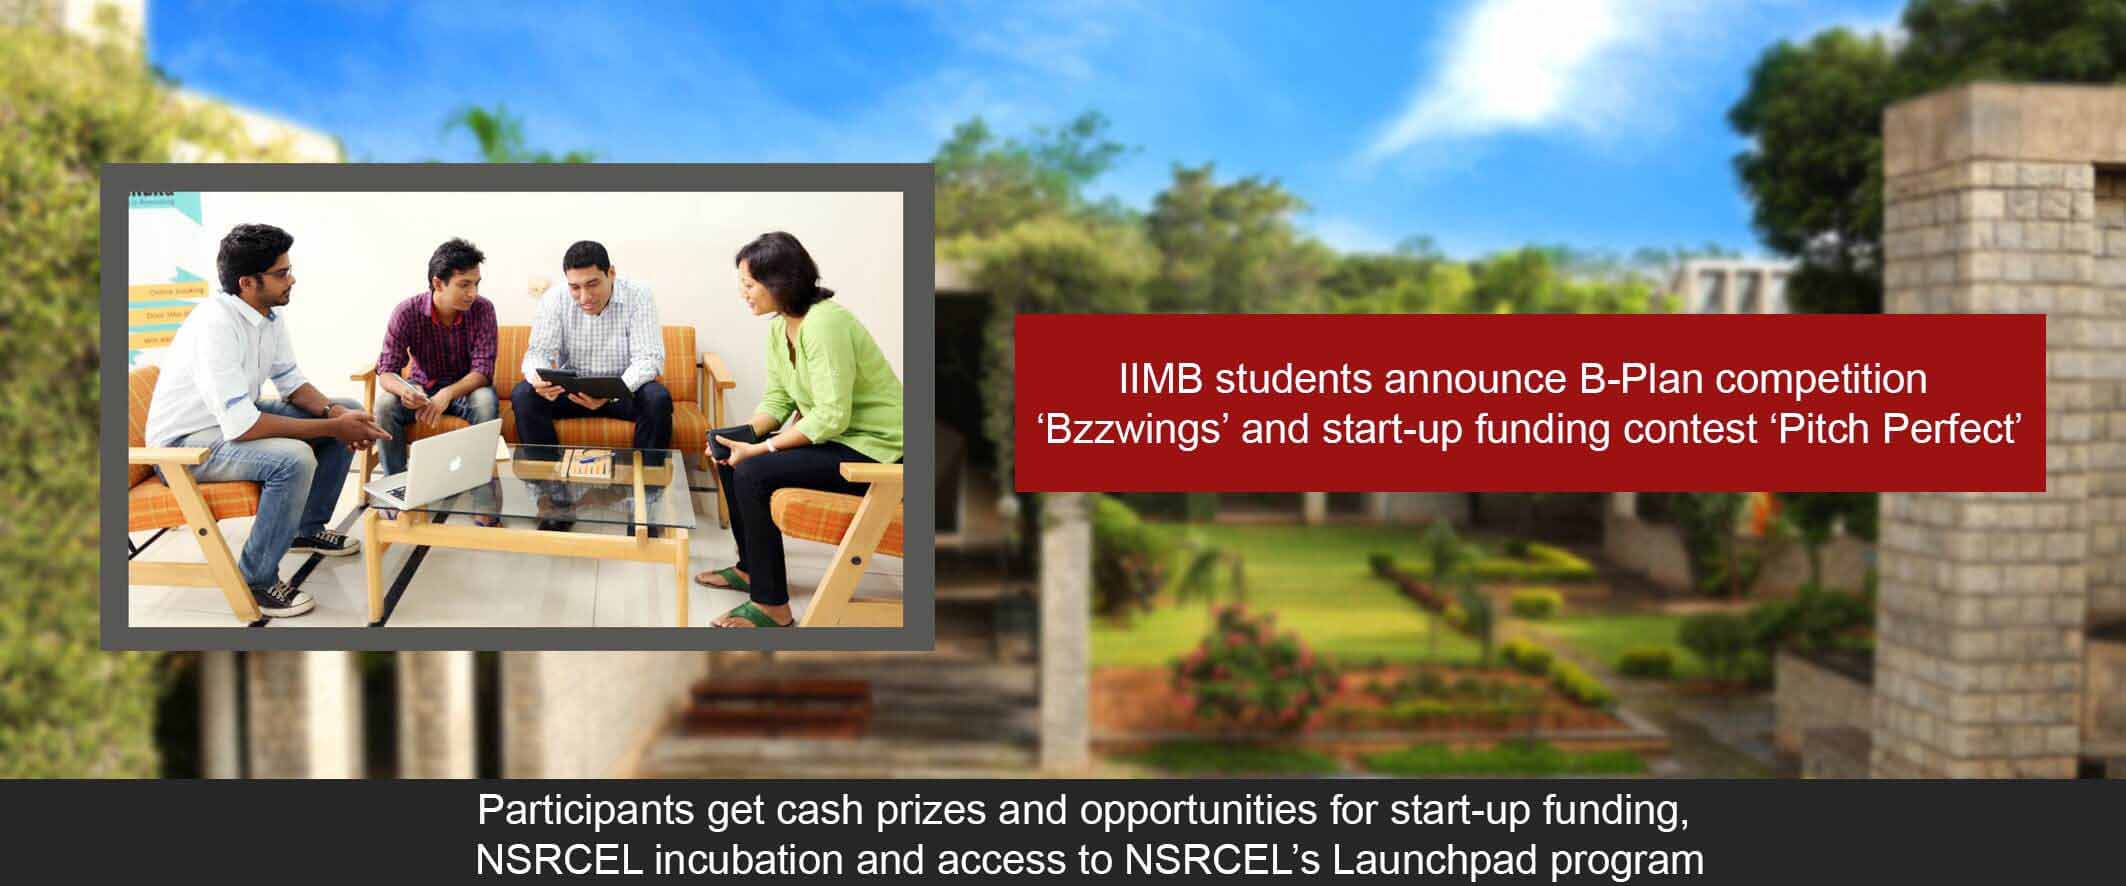 IIMB students announce B-Plan competition ‘Bzzwings’ and start-up funding contest ‘Pitch Perfect’ 